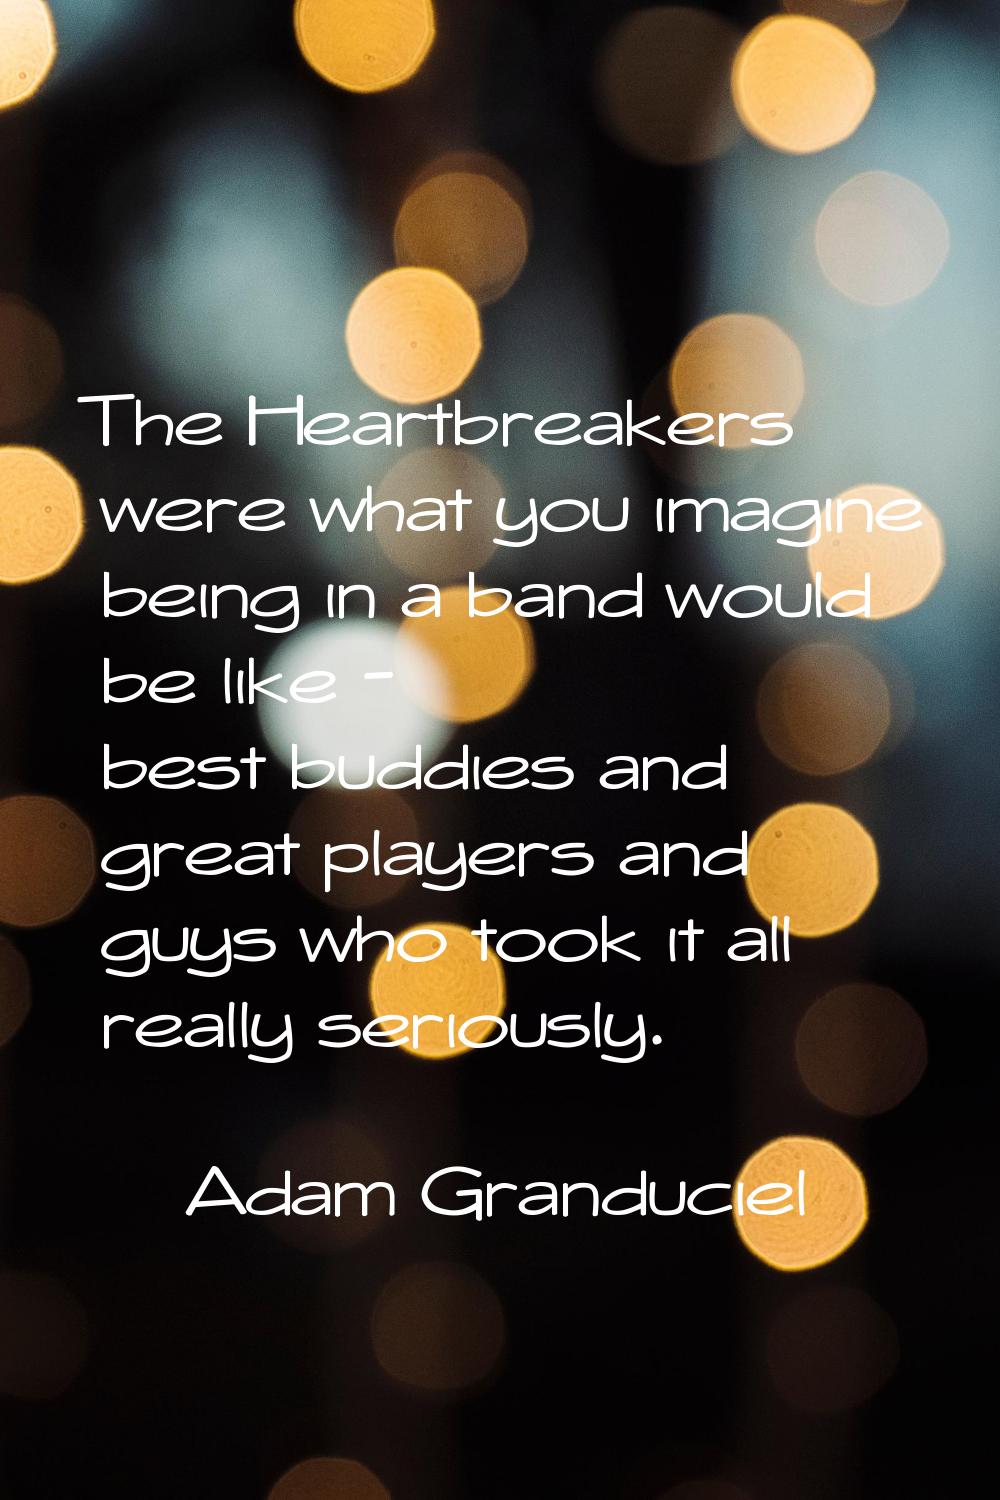 The Heartbreakers were what you imagine being in a band would be like - best buddies and great play